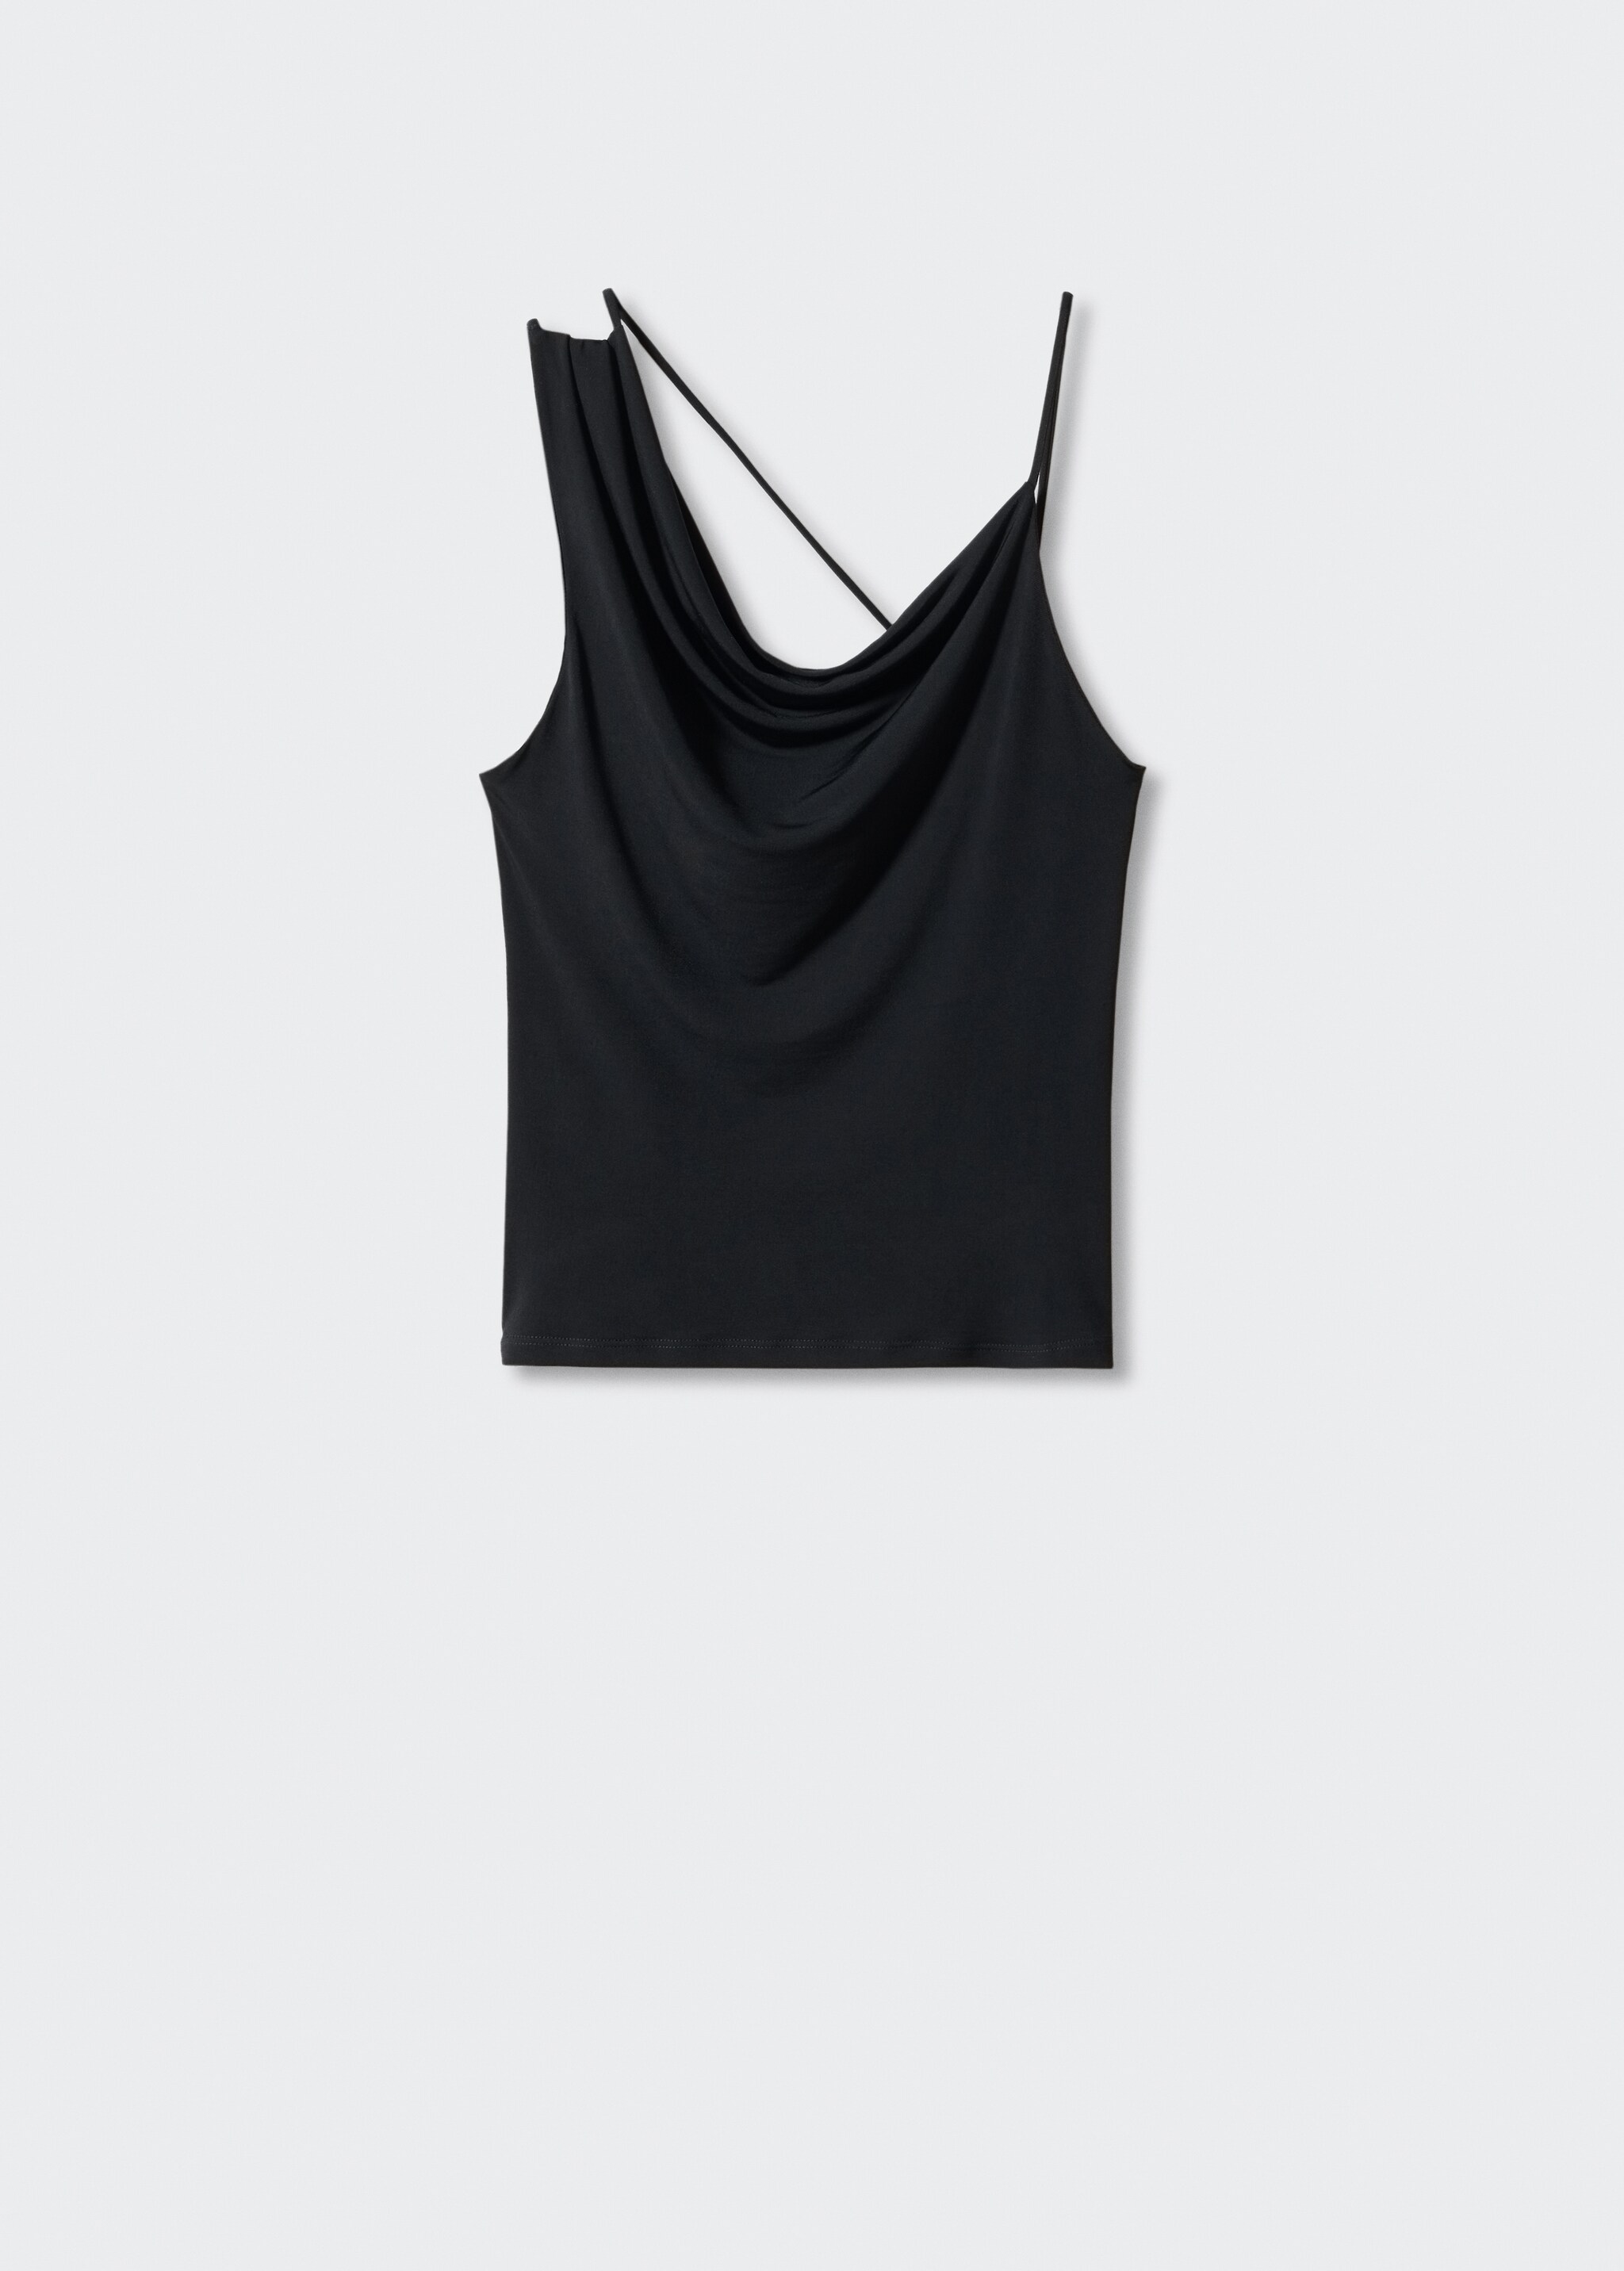 Asymmetrical top with draped neckline - Article without model